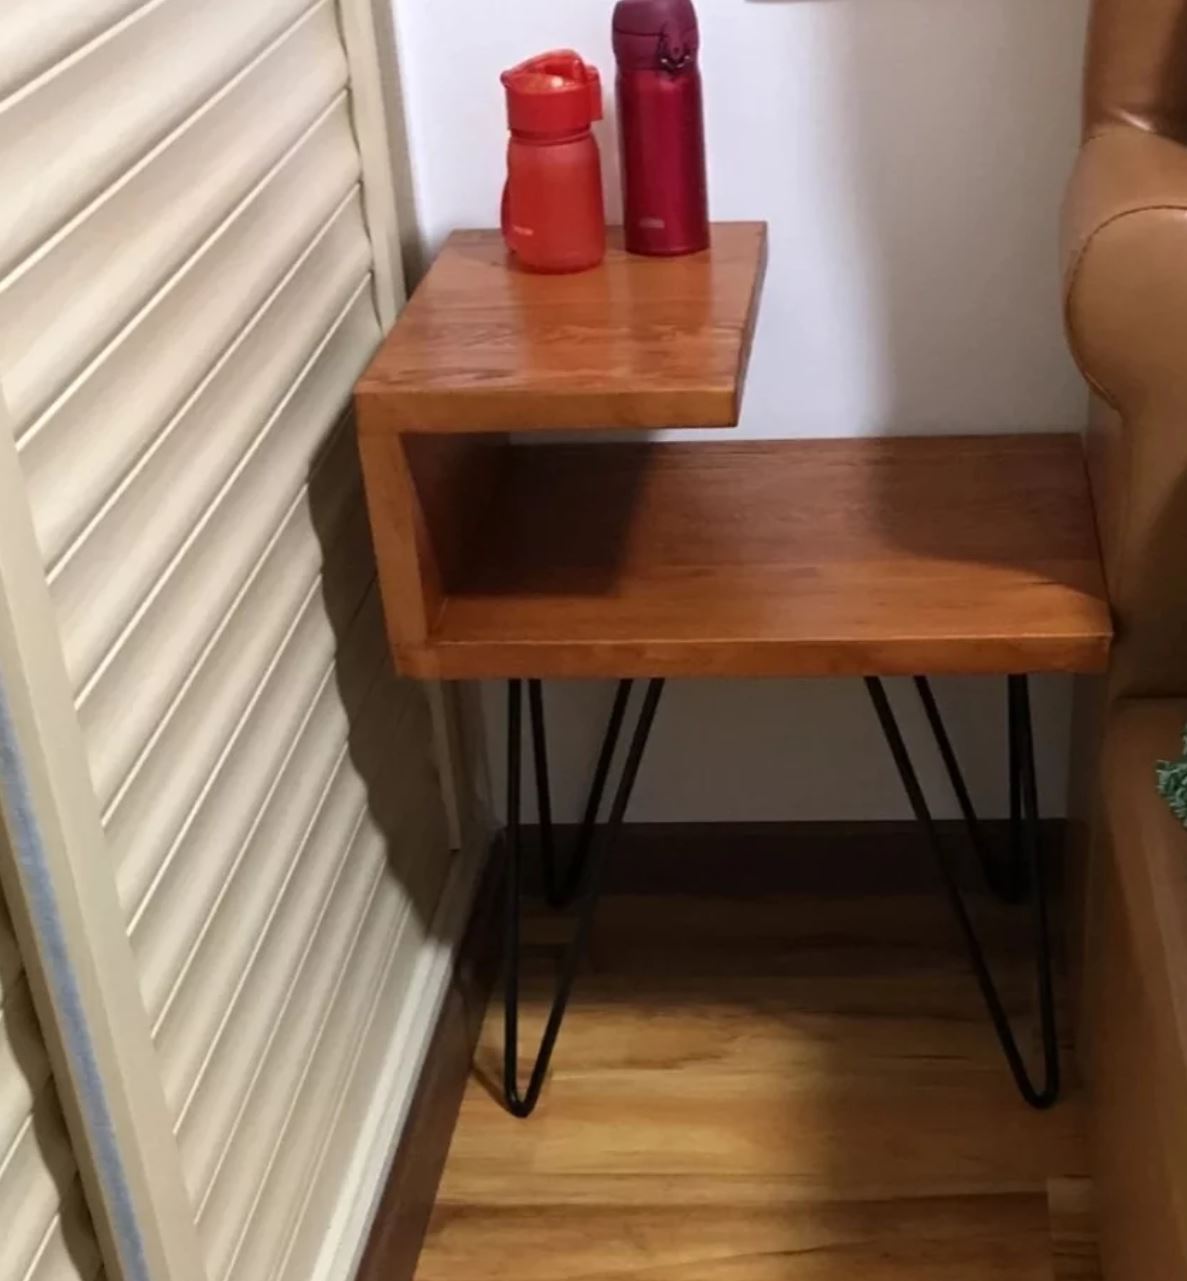 WAREHOUSE SALE ARIEL Modern Industrial Solid Wood Bedside Table ( Special Price $99 )